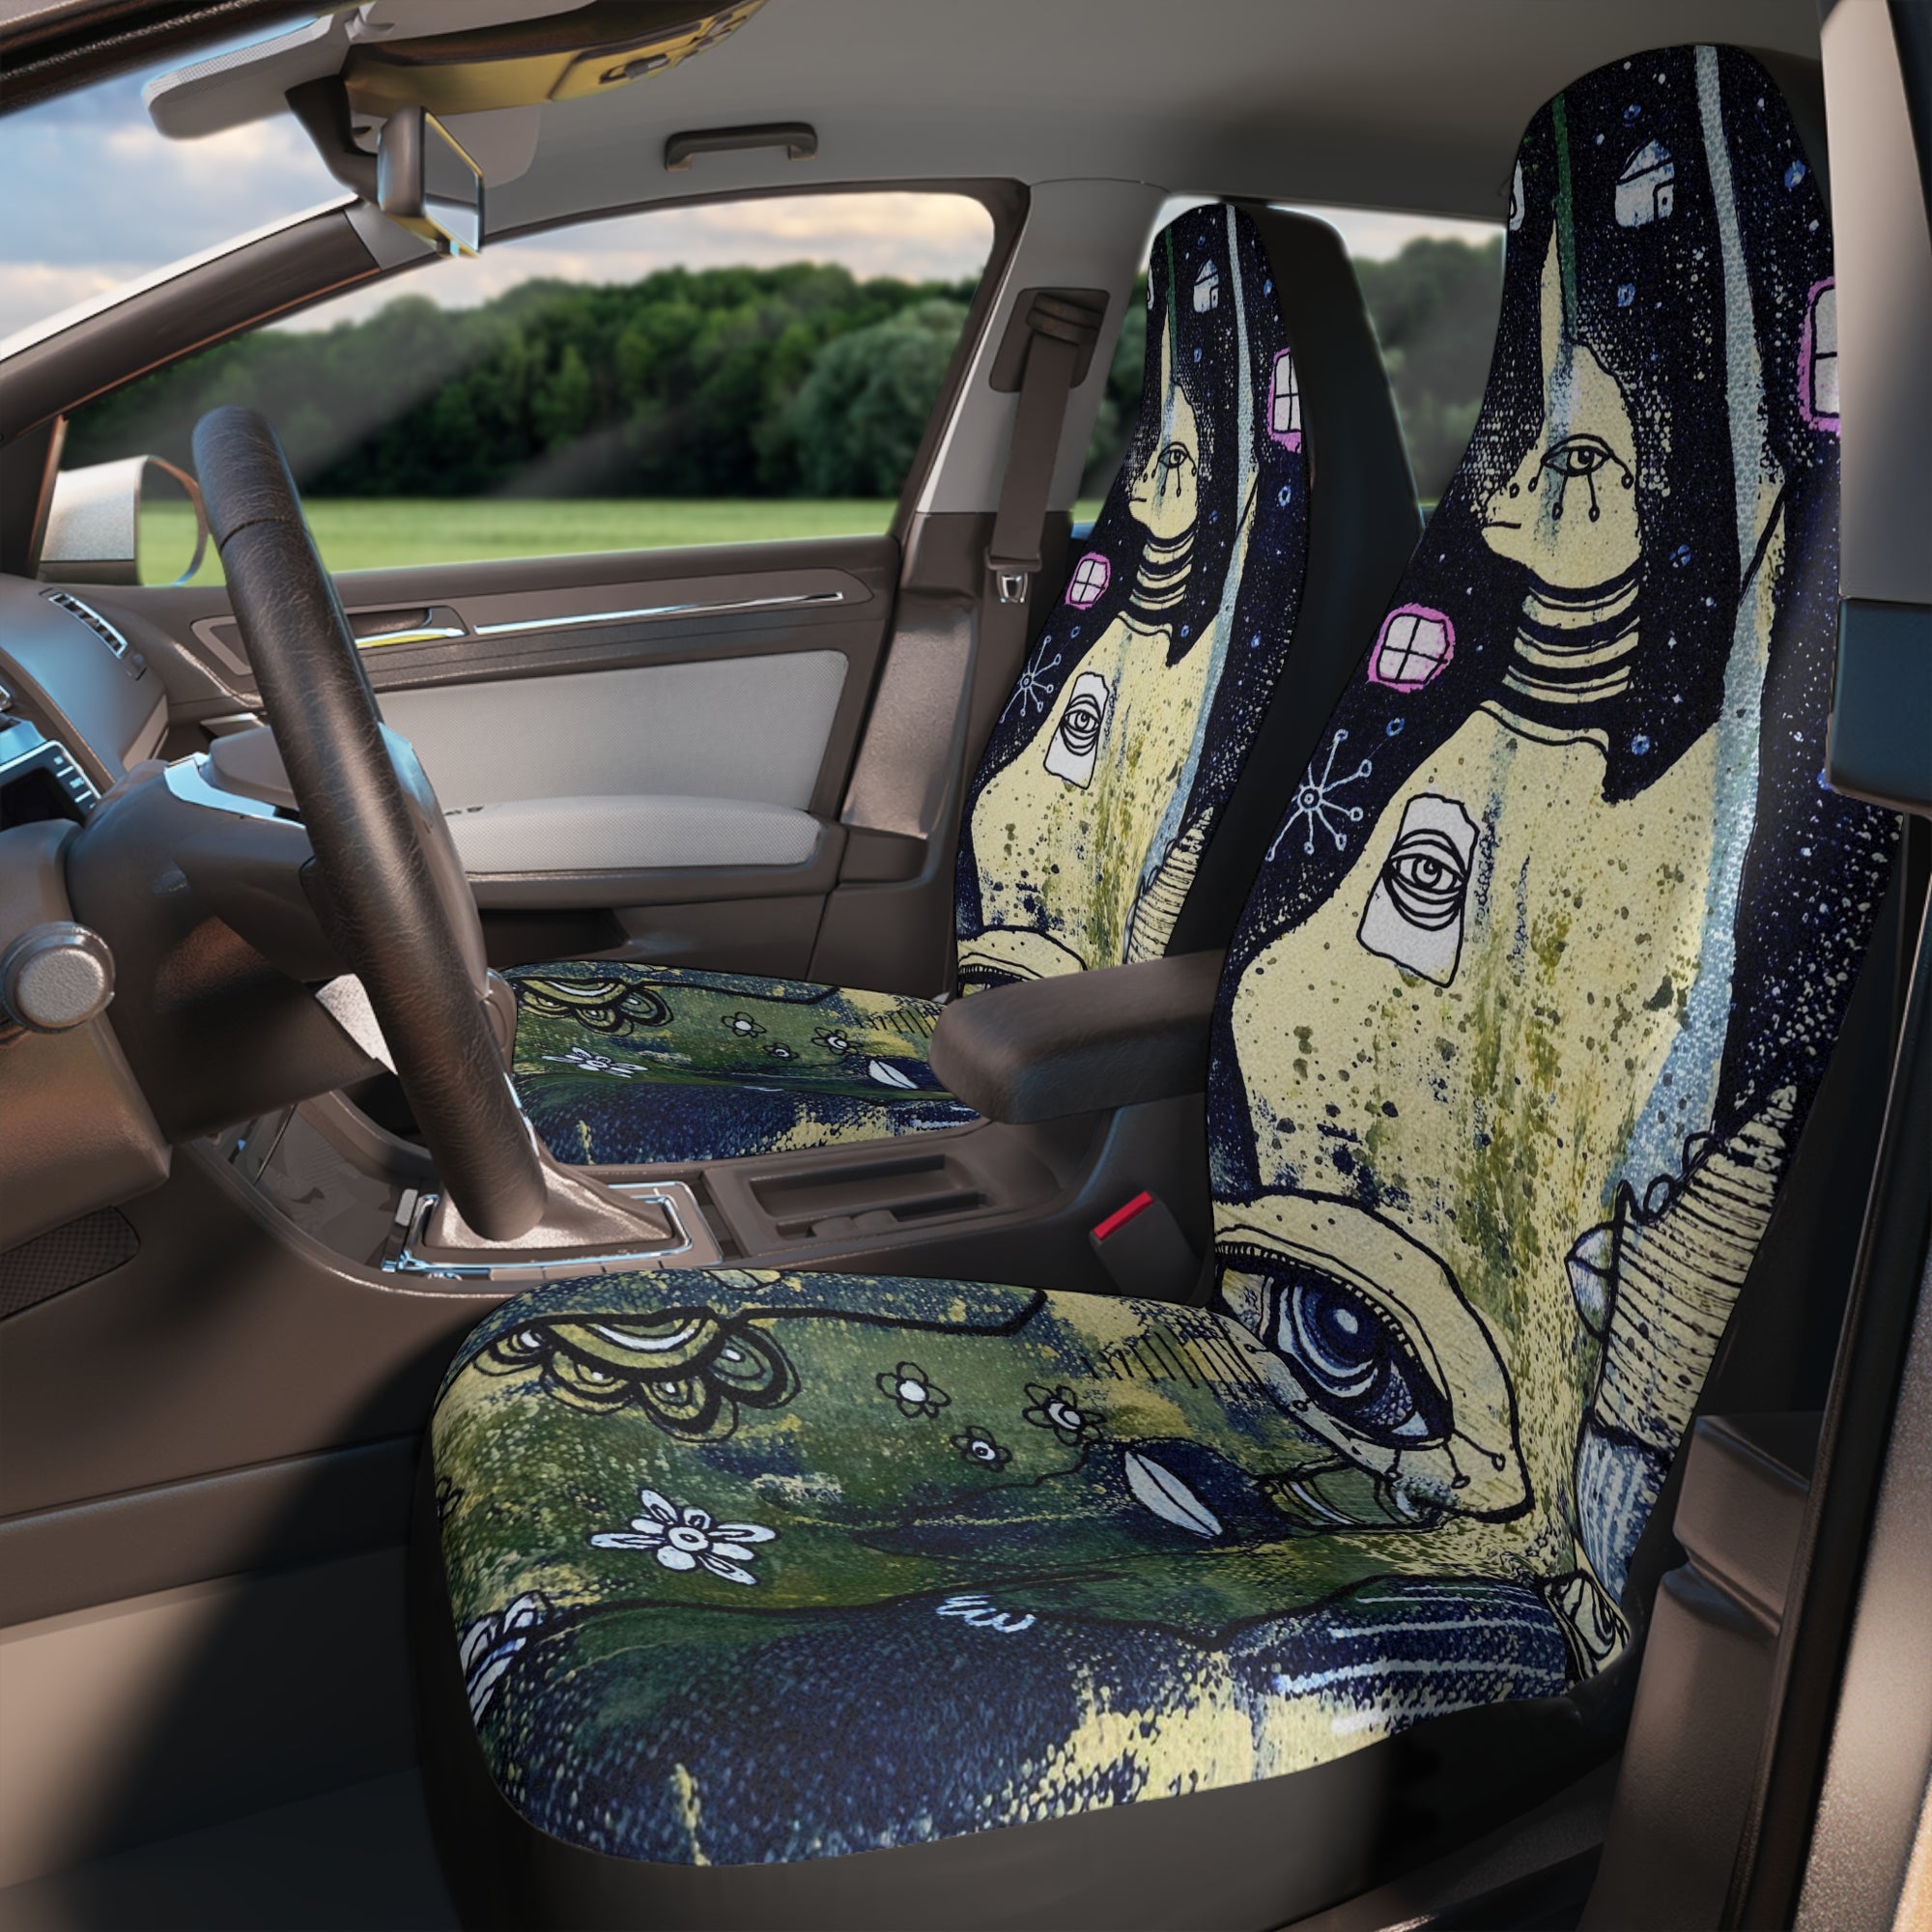 Original Intuitive Mixed Media Art on Car Seat Covers "Starry Night"